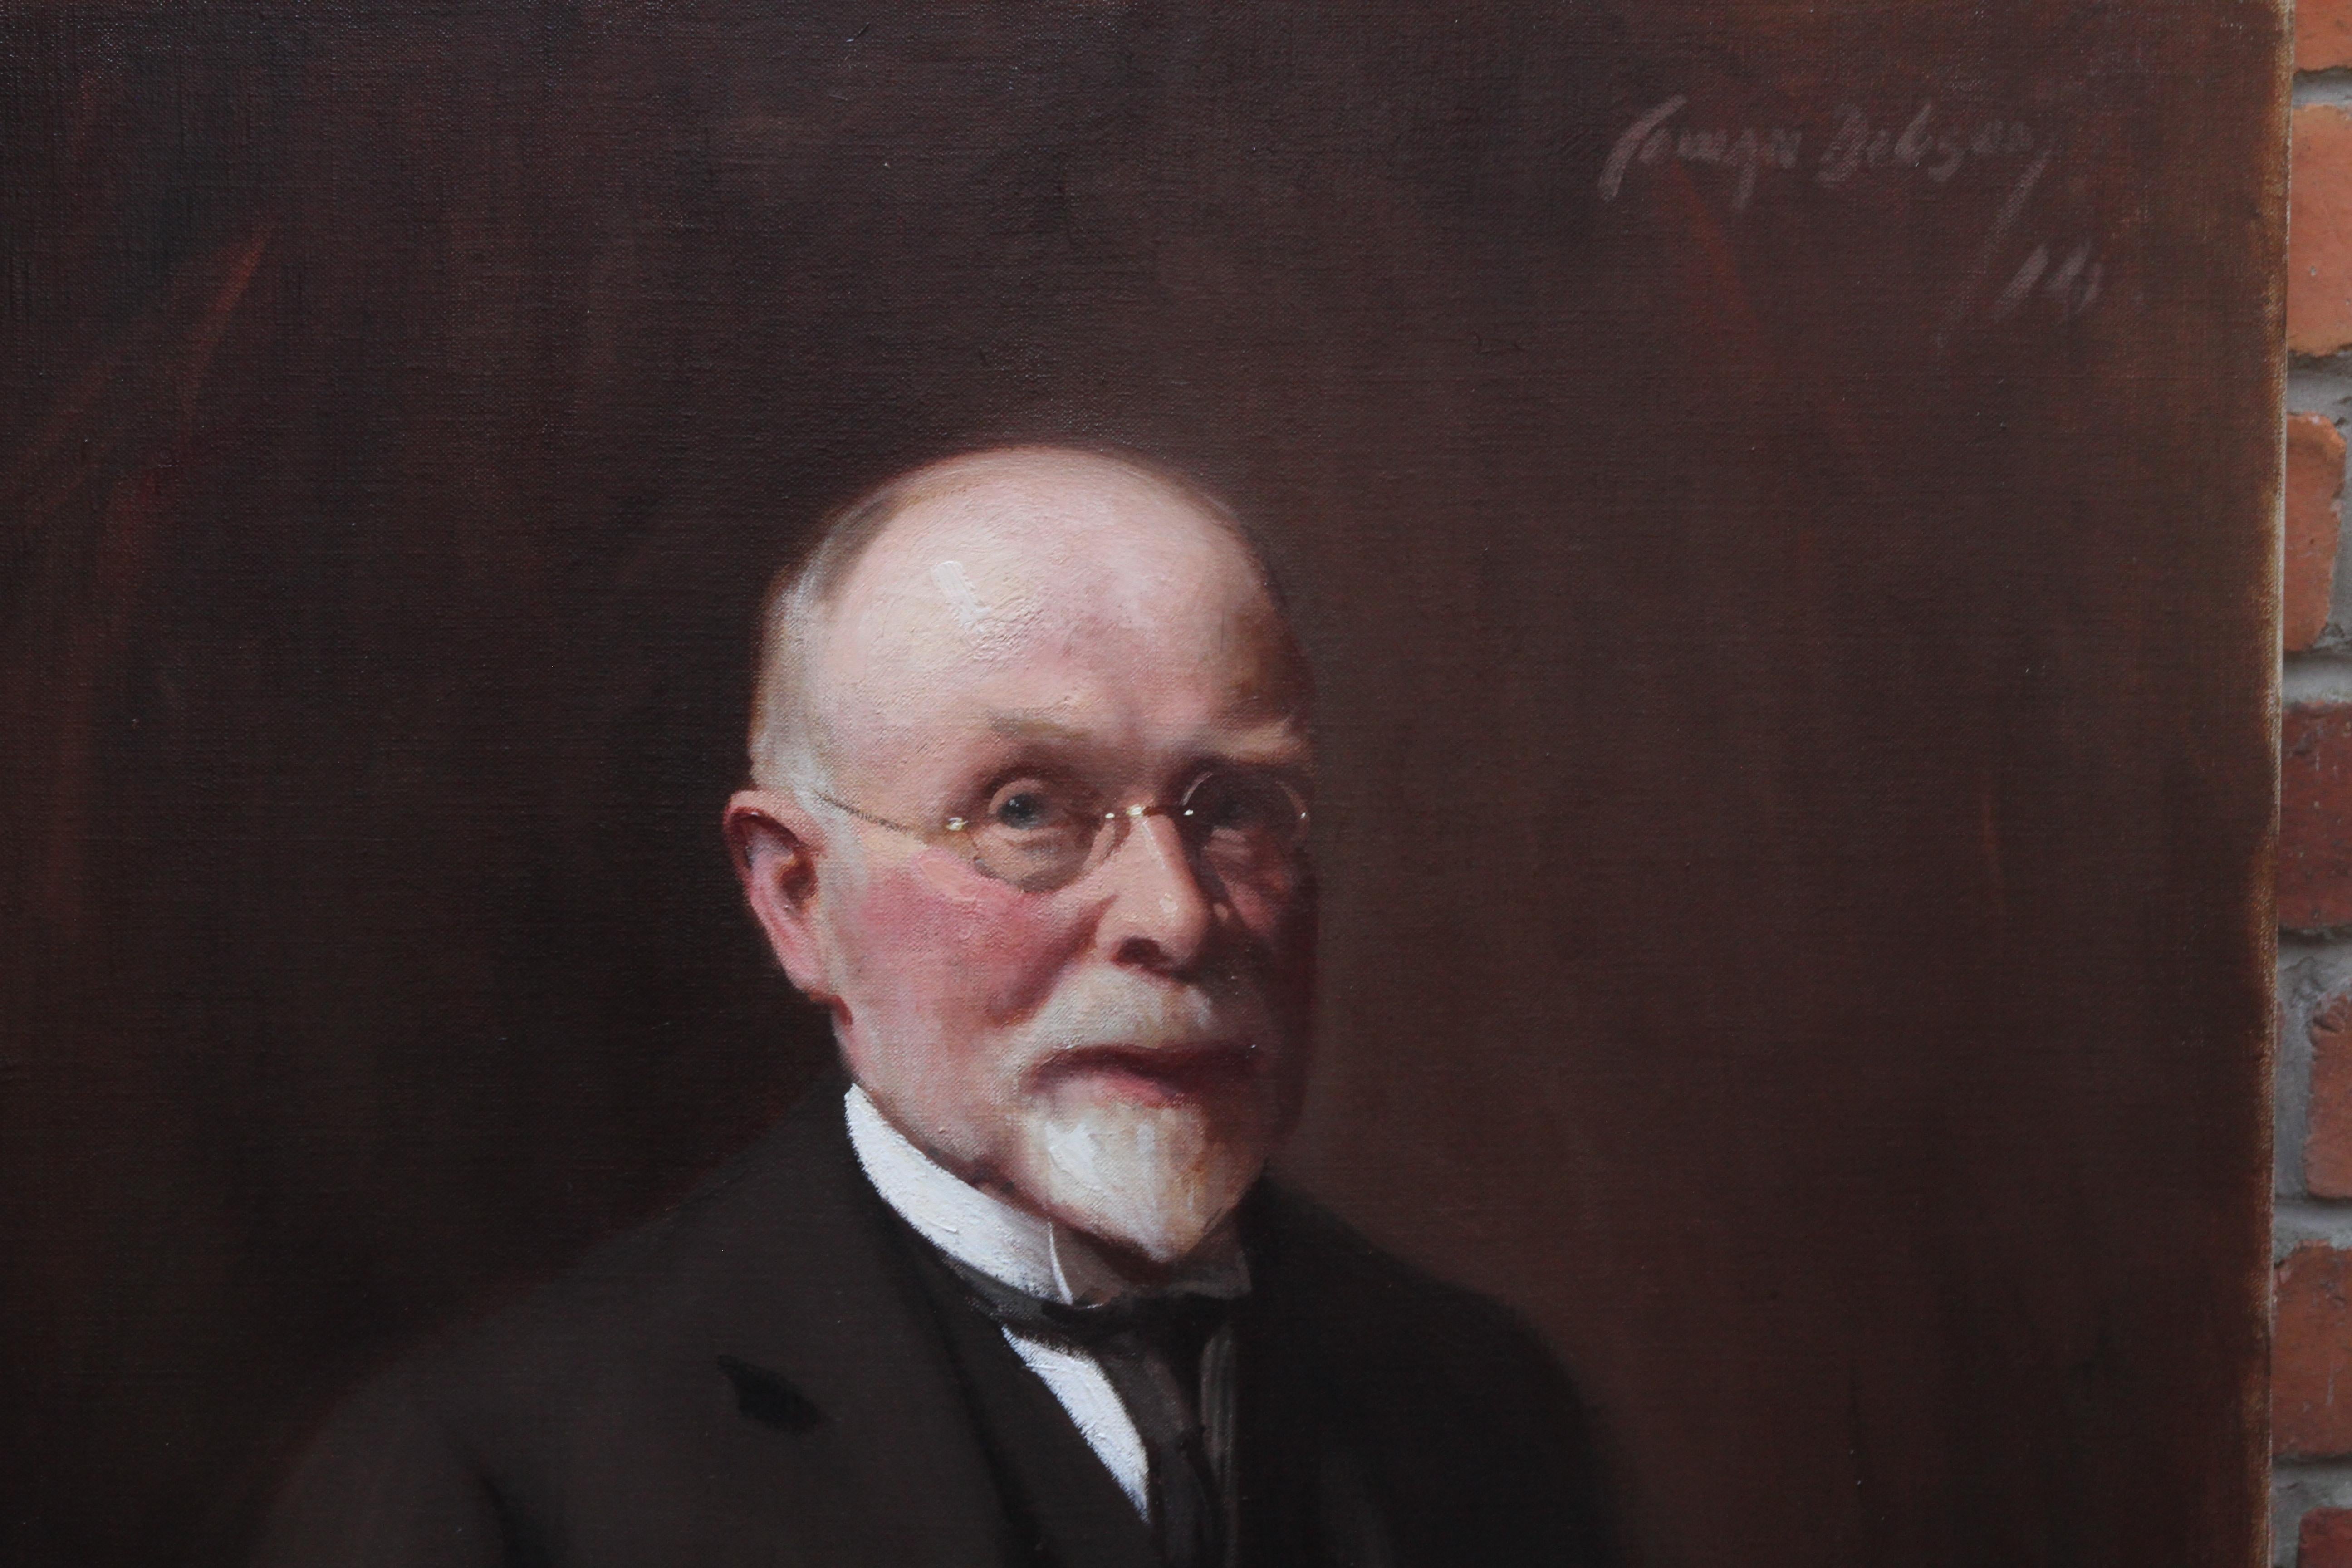 This impressive large portrait realist oil painting is by noted Scottish artist David Cowan Dobson. One of a pair, the sitter is Mr R H Sinclair and dates to 1914. He is beautifully captured as an aging, dignified gentleman with his glasses and